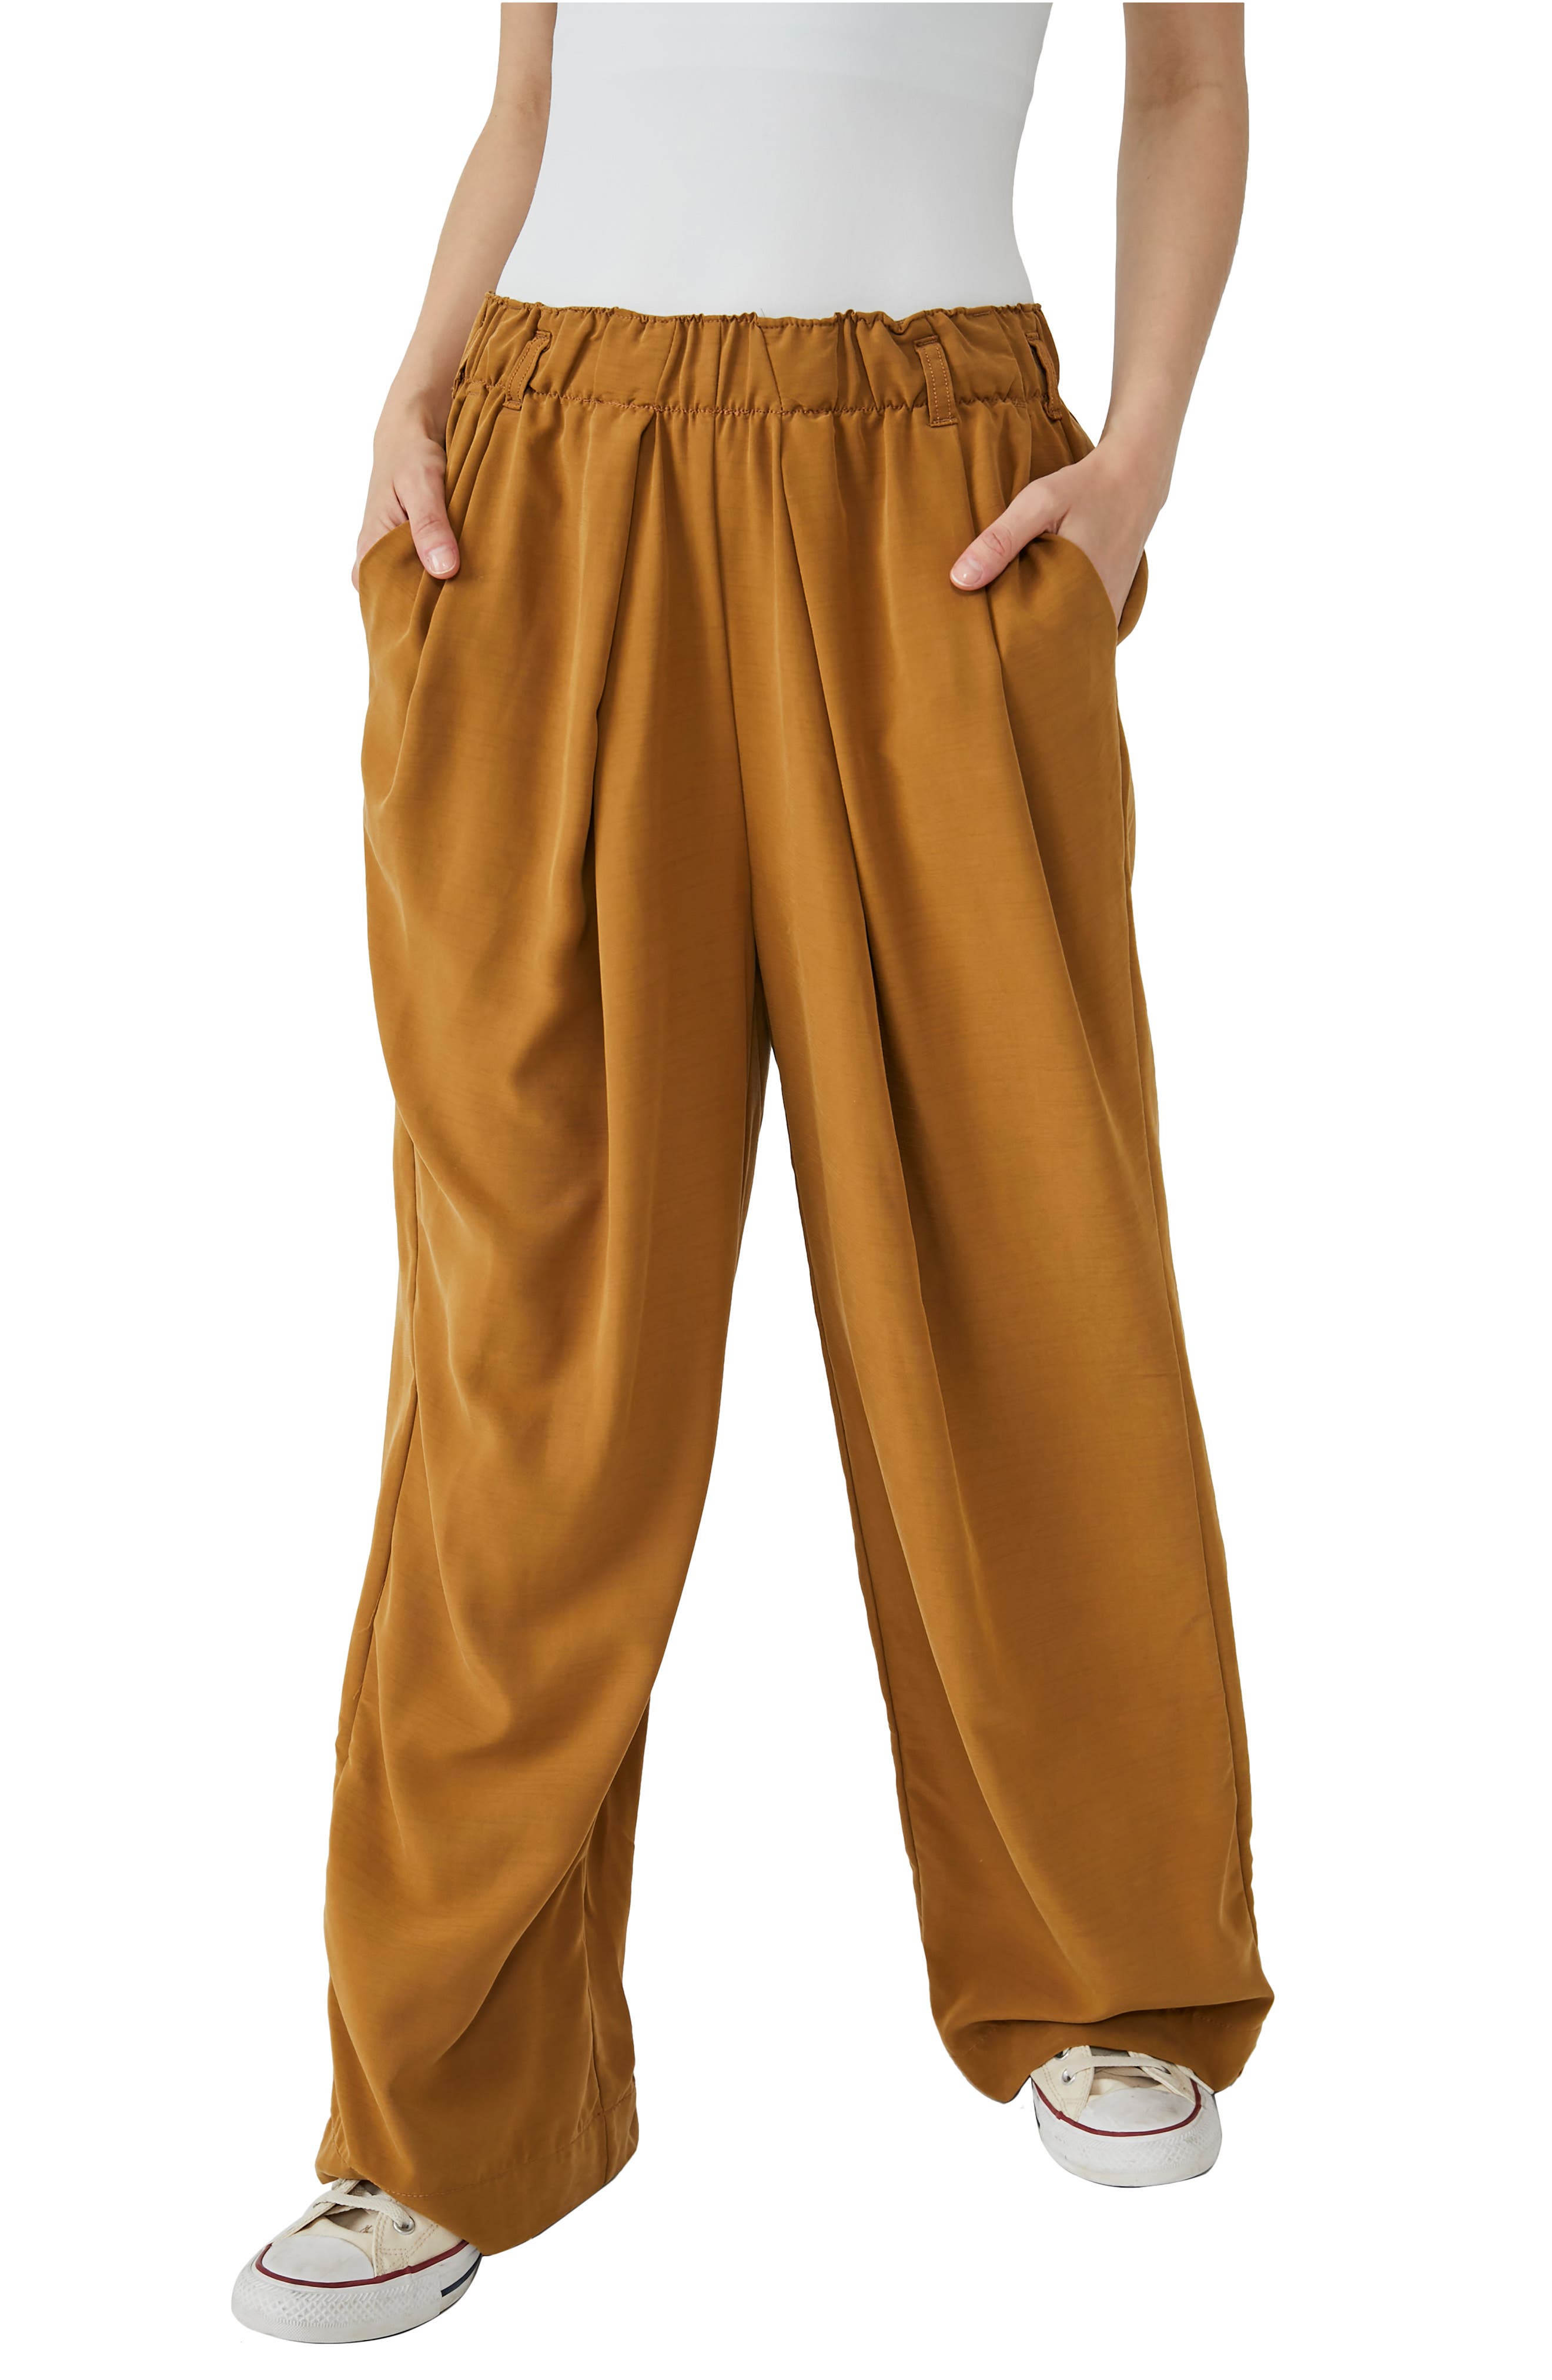 Womens Clothing Trousers Monki Synthetic High-waist Flared Trousers in Beige Brown Slacks and Chinos Wide-leg and palazzo trousers 